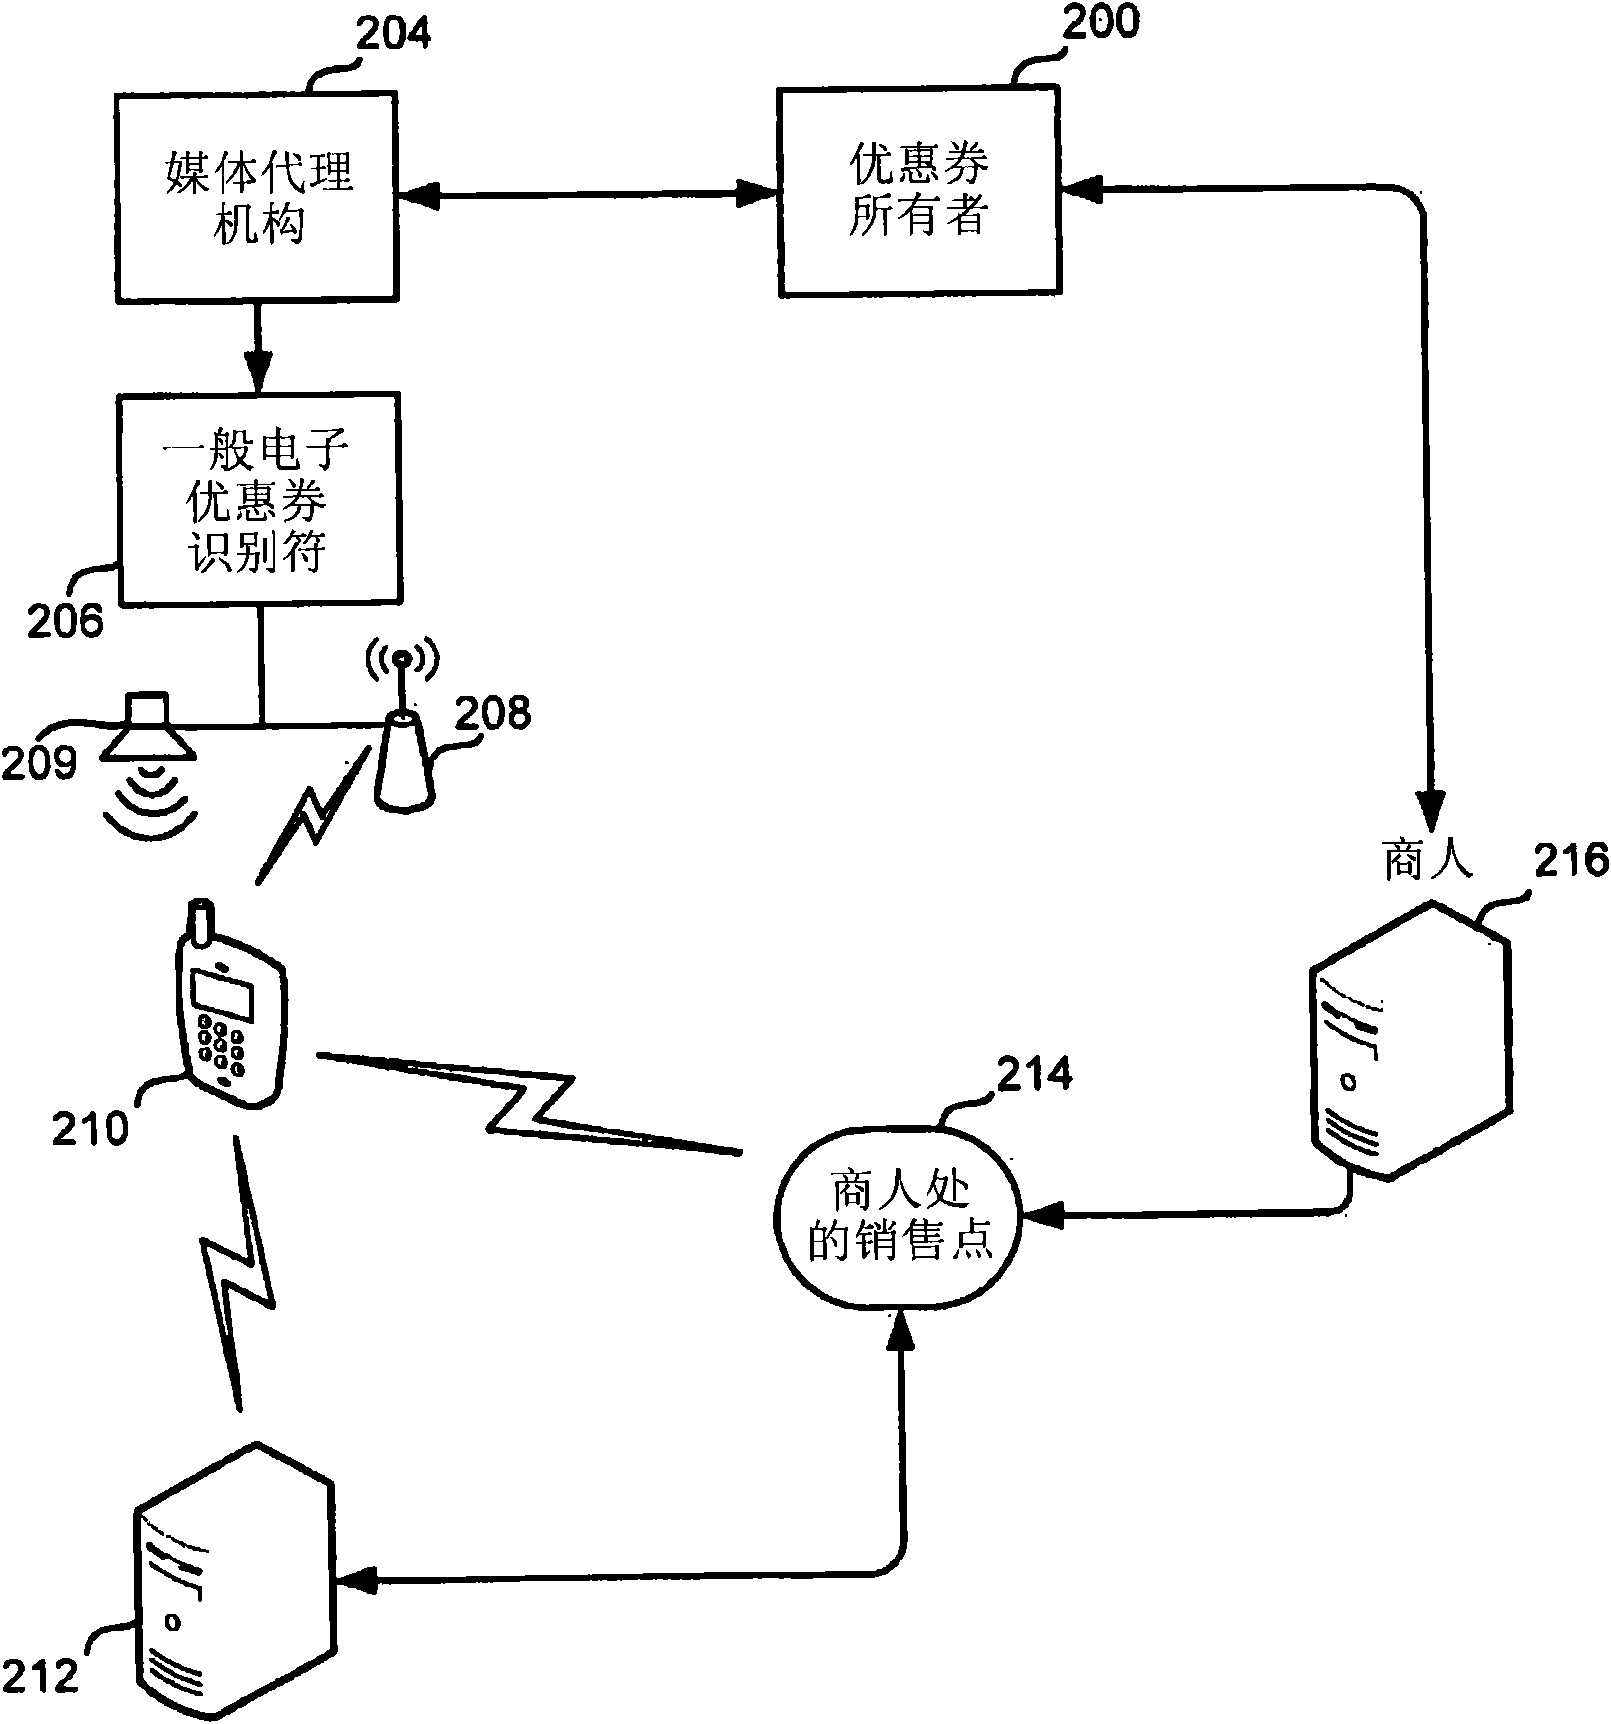 Method and apparatus for distribution and personalization of e-coupons